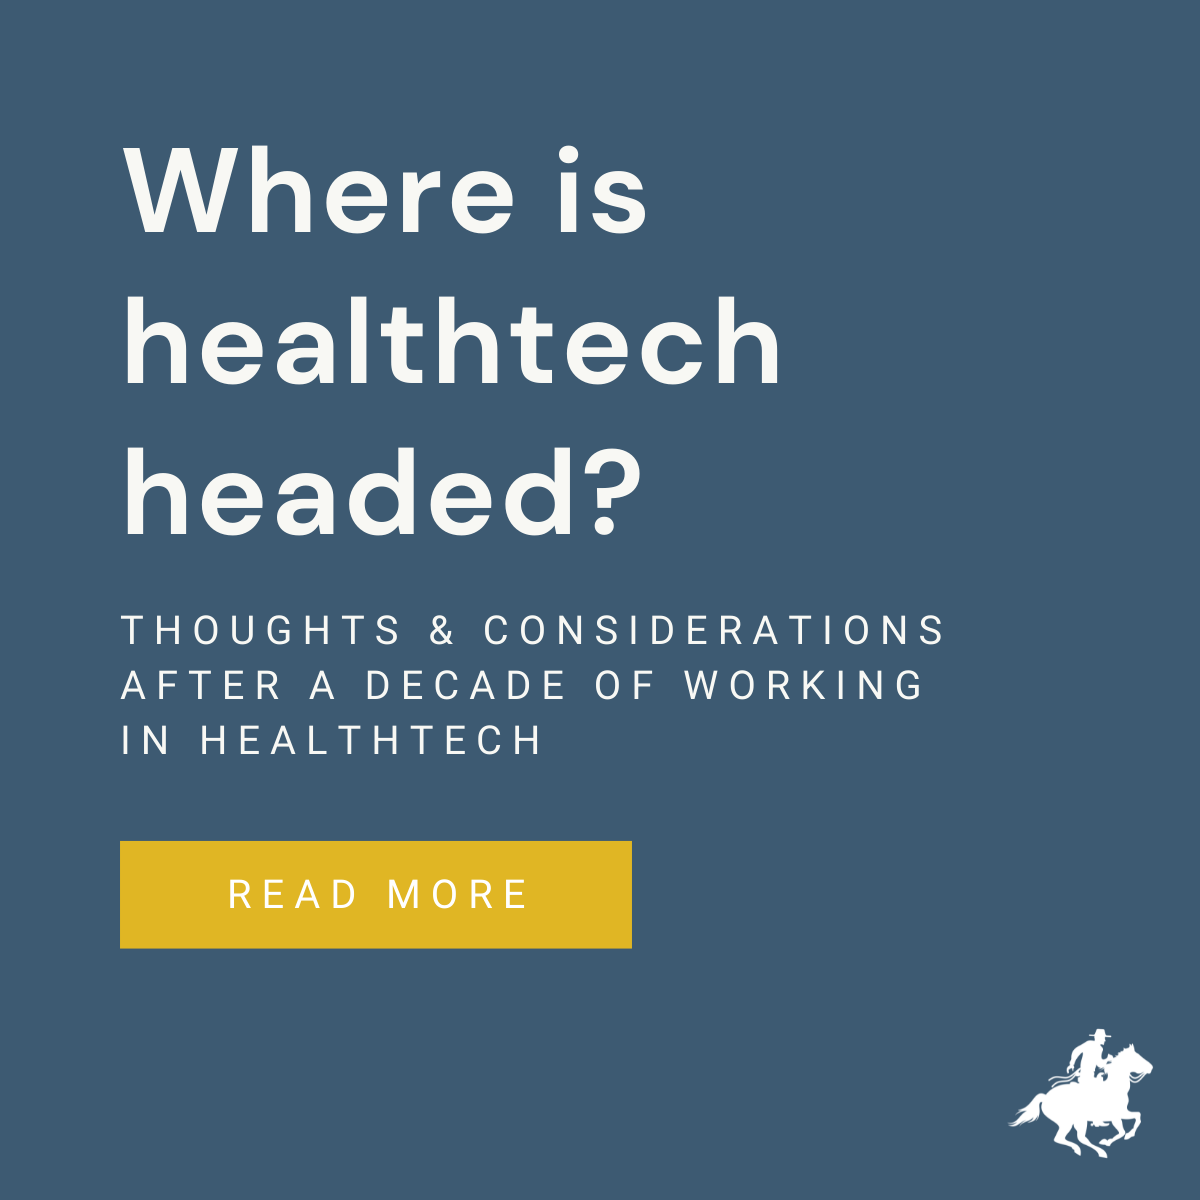 Where is healthtech headed?